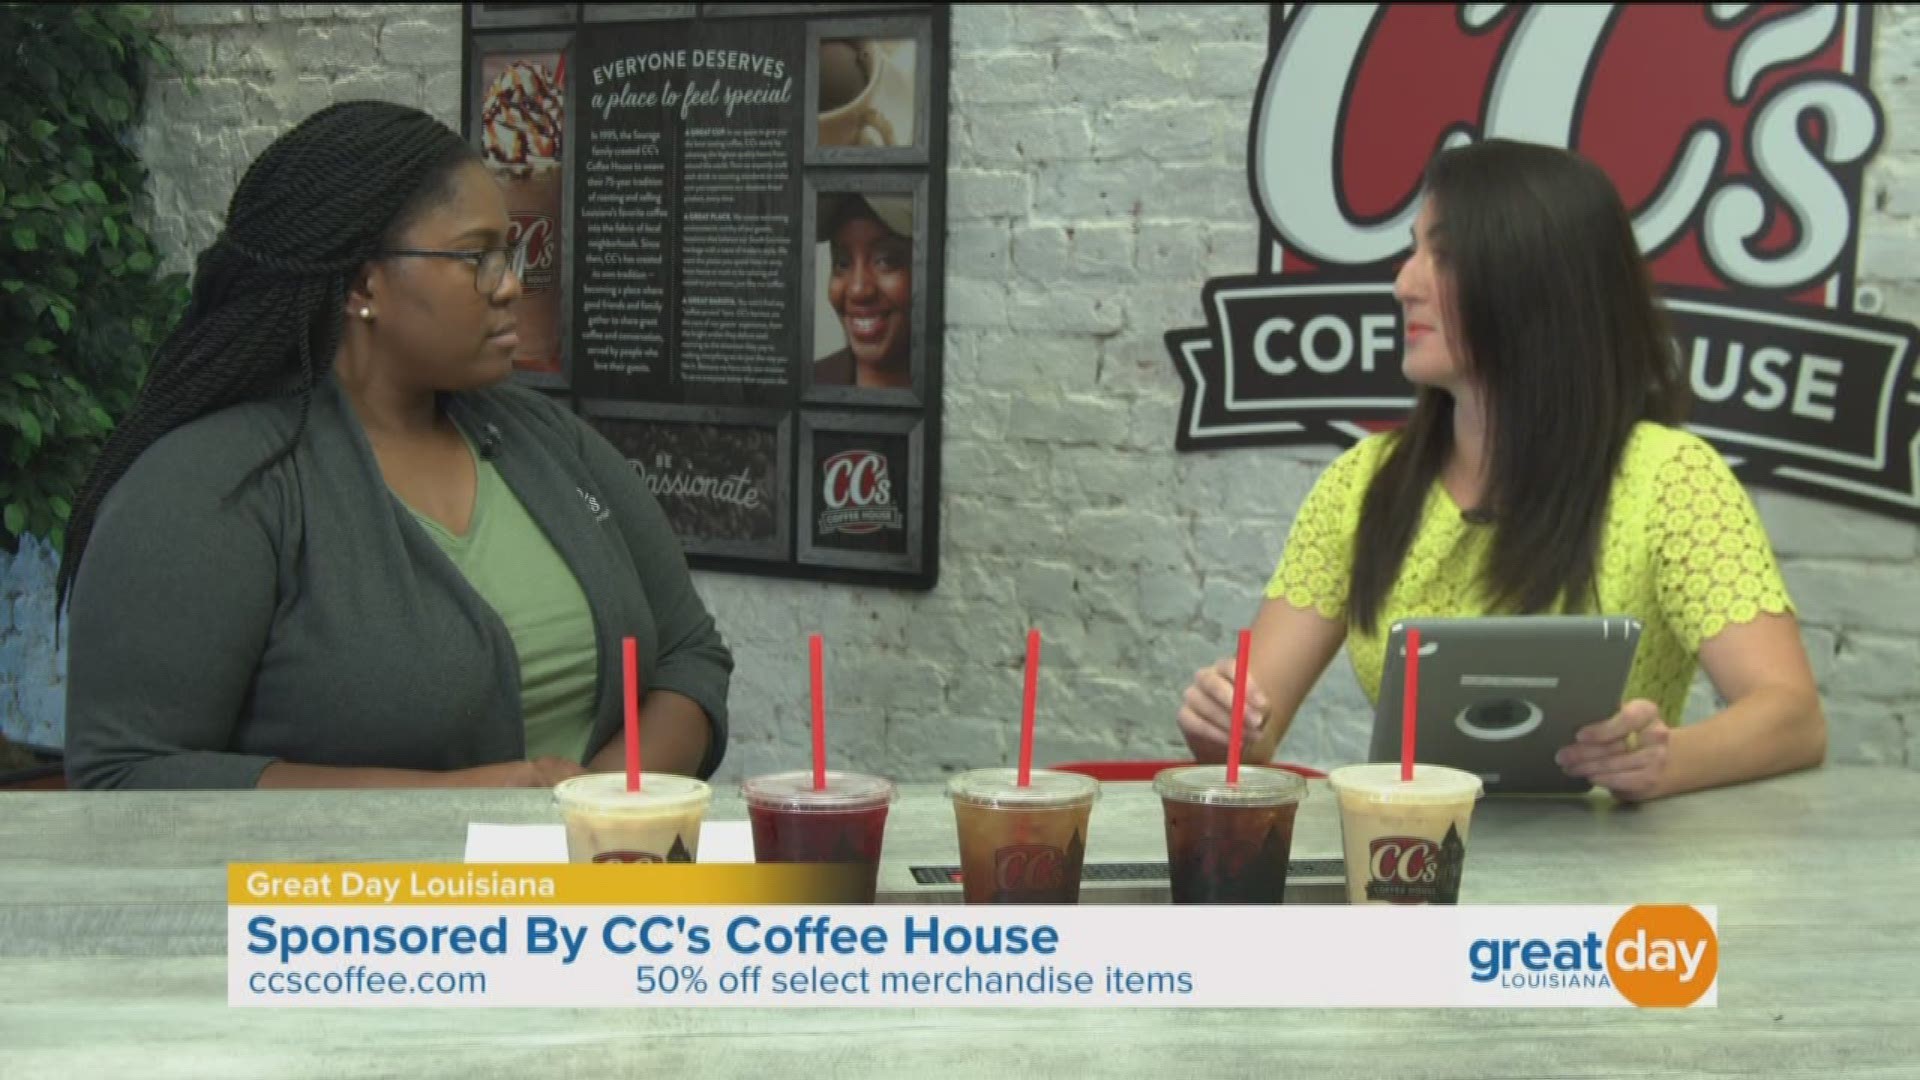 Barista Jessica Andrus is back and tells us all about CC's delicious frozen and iced beverages that are perfect in the the summer heat! And, have you always wanted a French Press? CC's is offering 50% off select merchandise items, which also includes, tea pots and storage jars. This offer is available at participating locations. Consider this your opportunity to start your holiday shopping early!